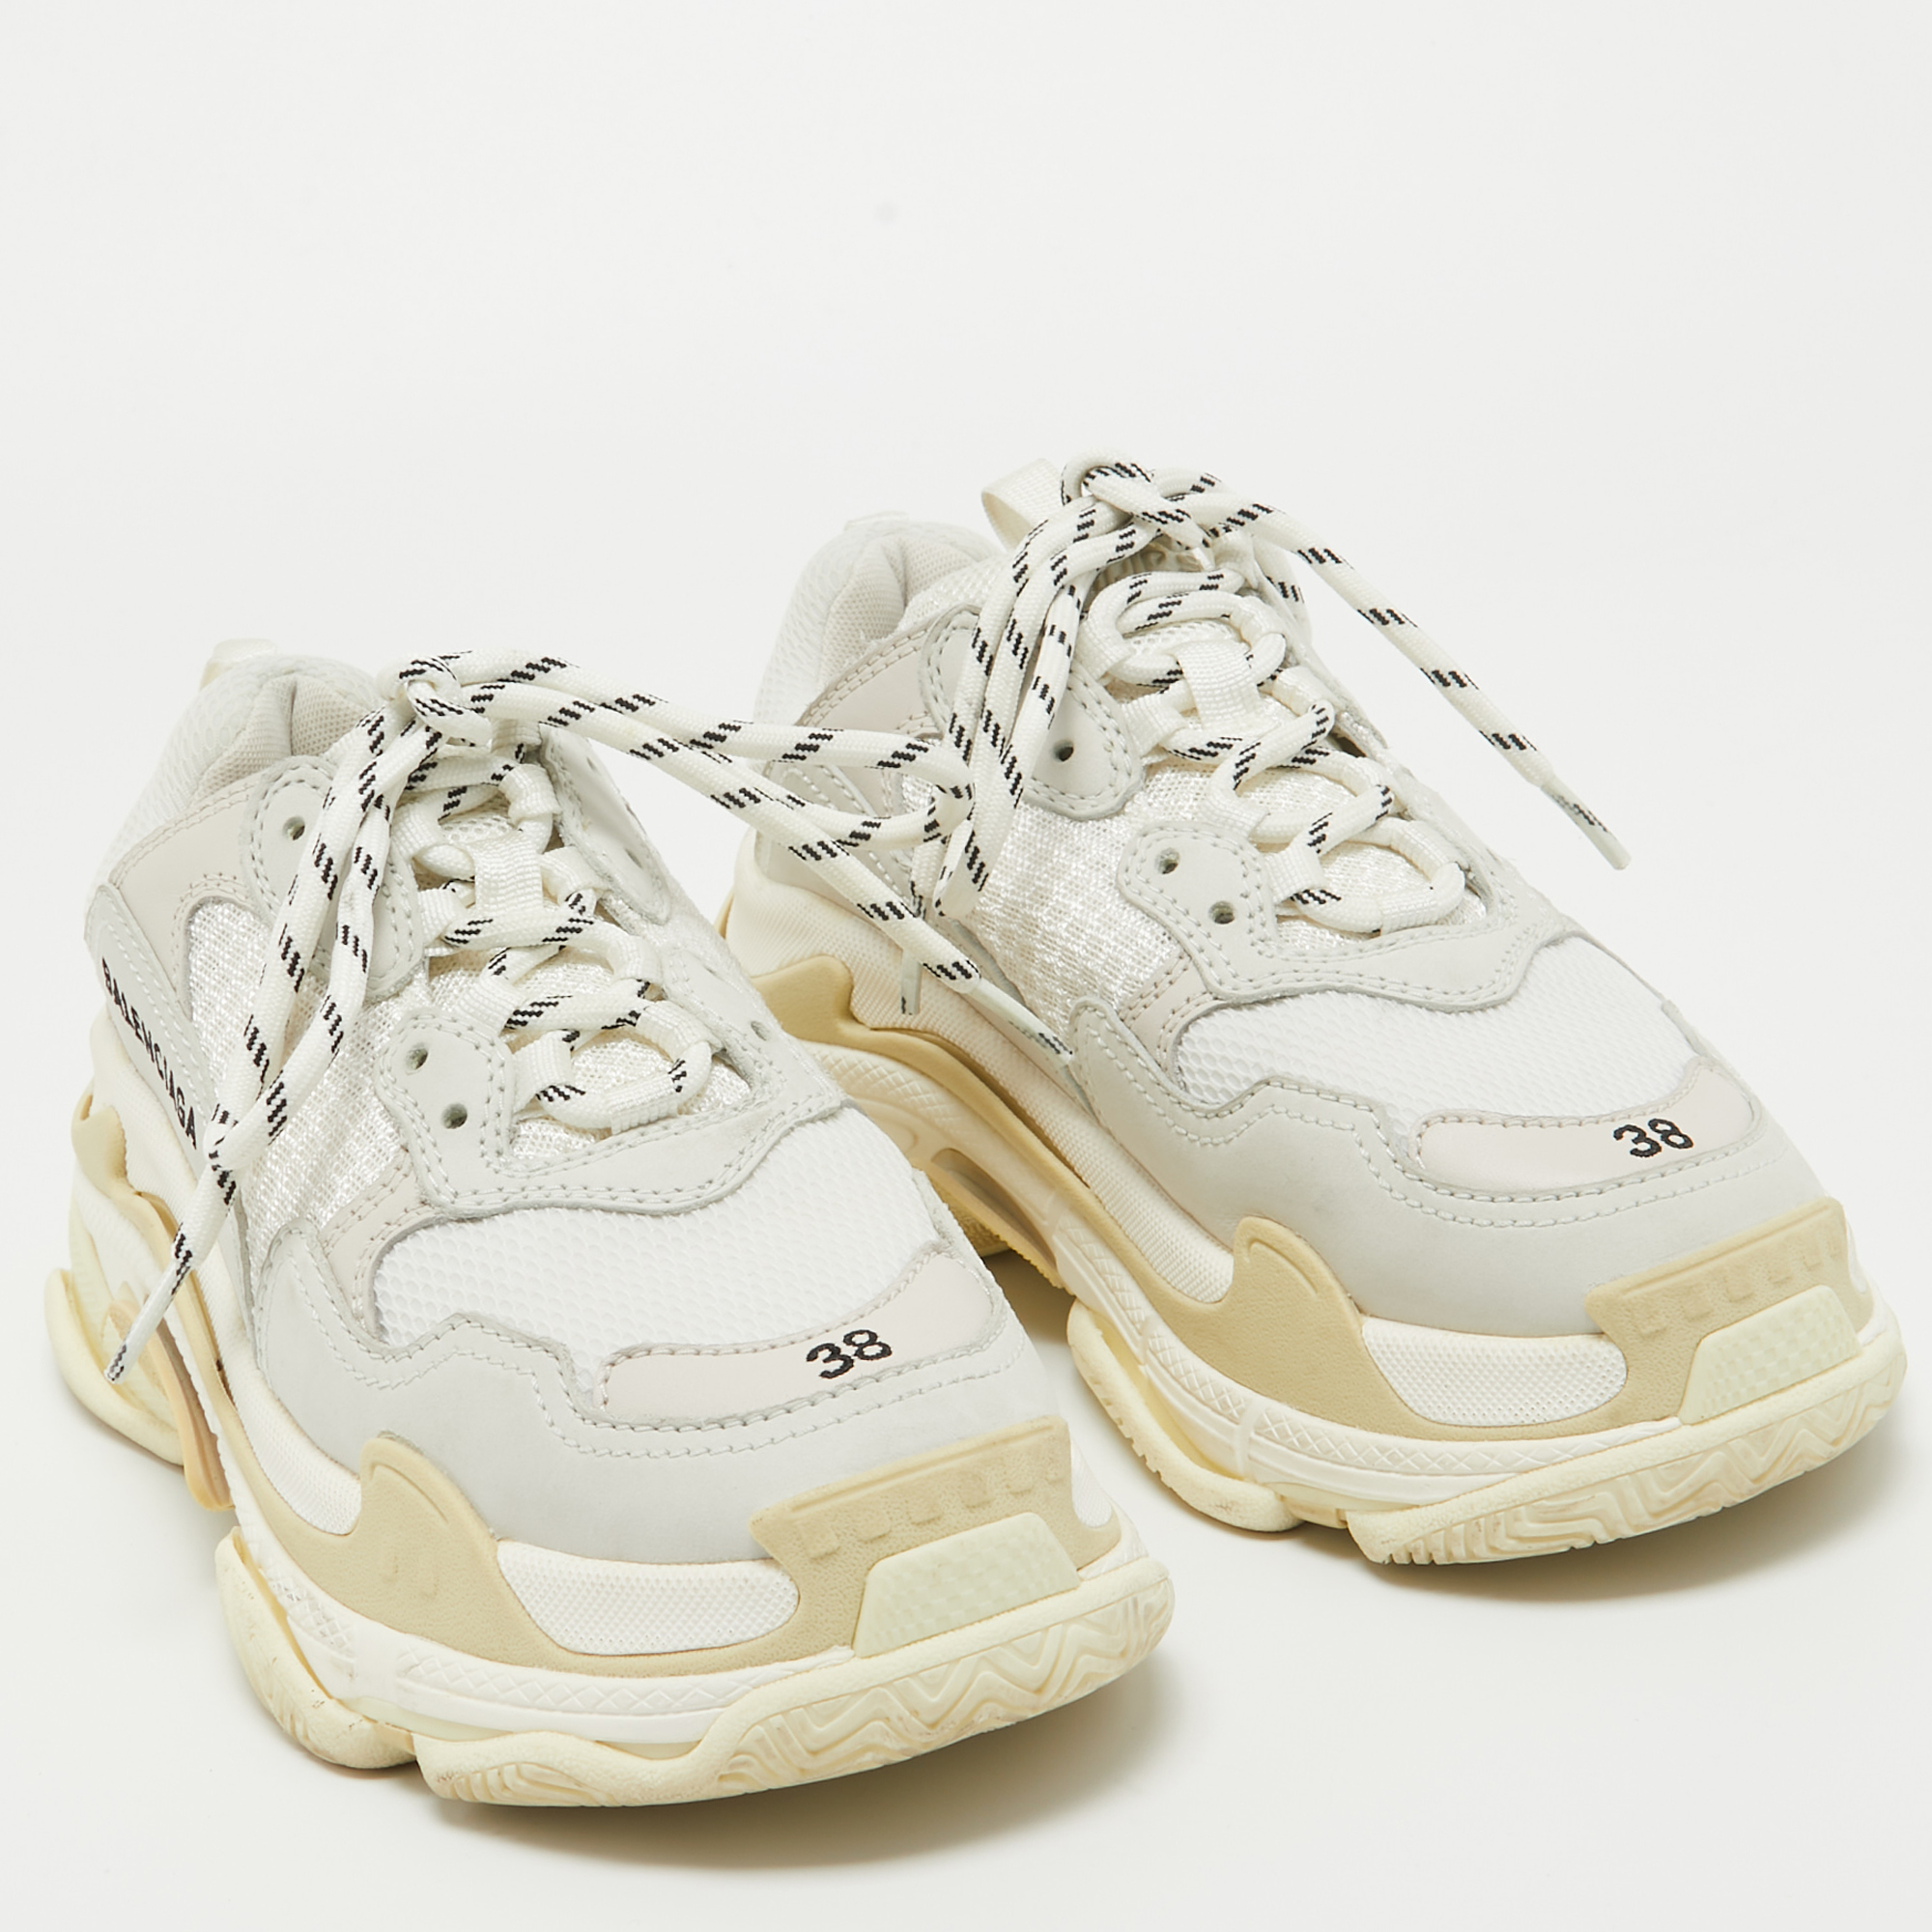 Balenciaga White/Grey Leather And Mesh Triple S Sneakers Size 38